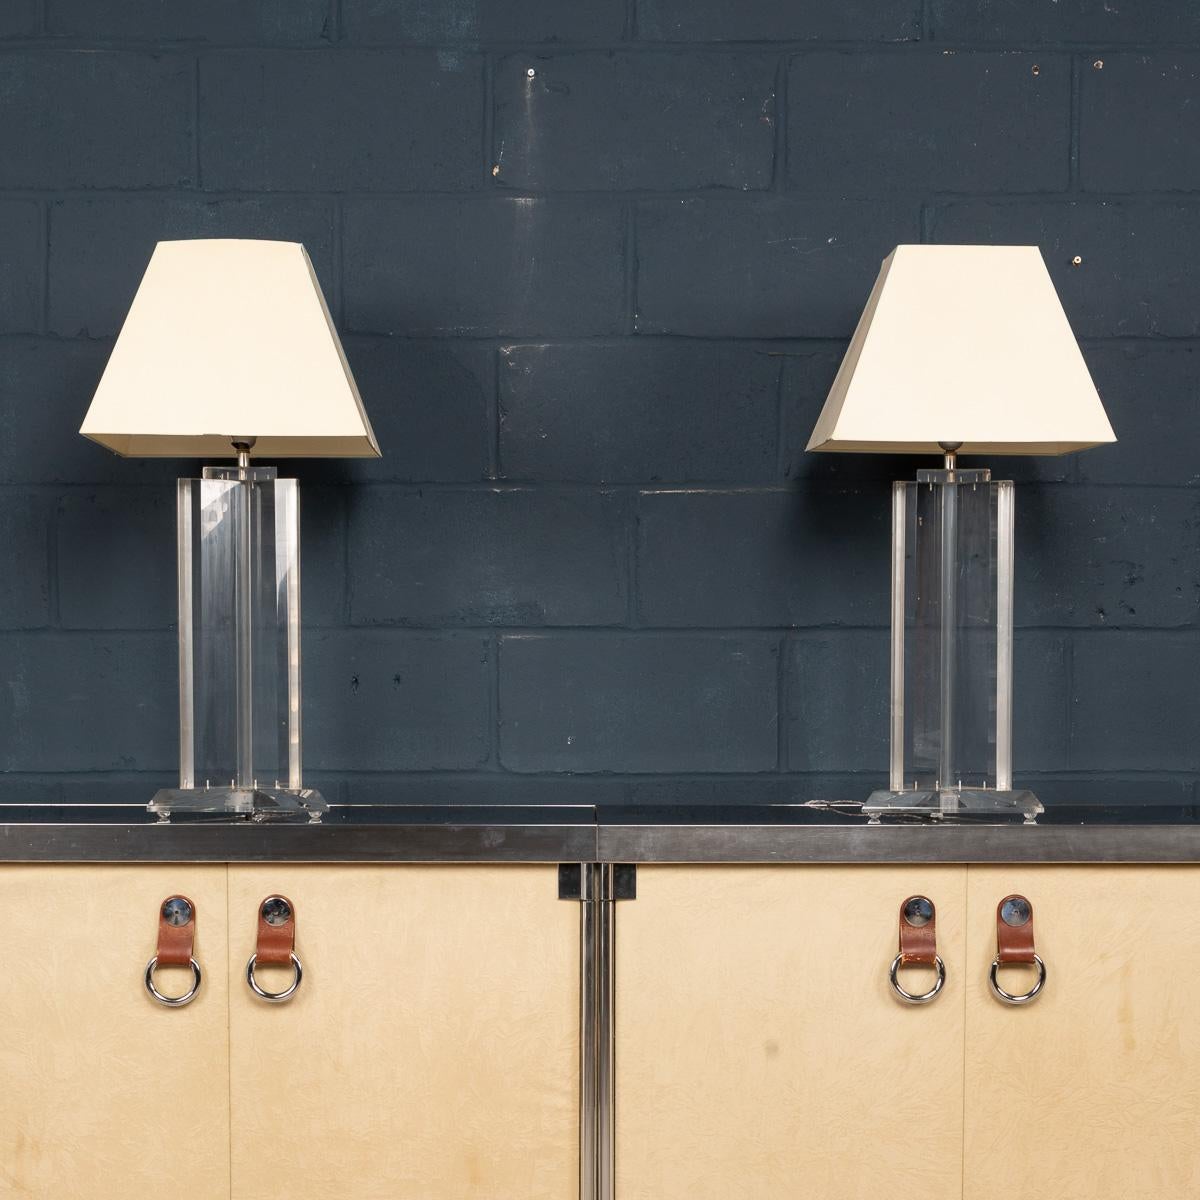 A chic pair of mid-century modernist stacked Lucite lamps, realised in the manner of Karl Springer.

Condition
In great condition - some crazing to the Lucite, otherwise good vintage condition.

Size
diameter: 36cm
height: 74cm